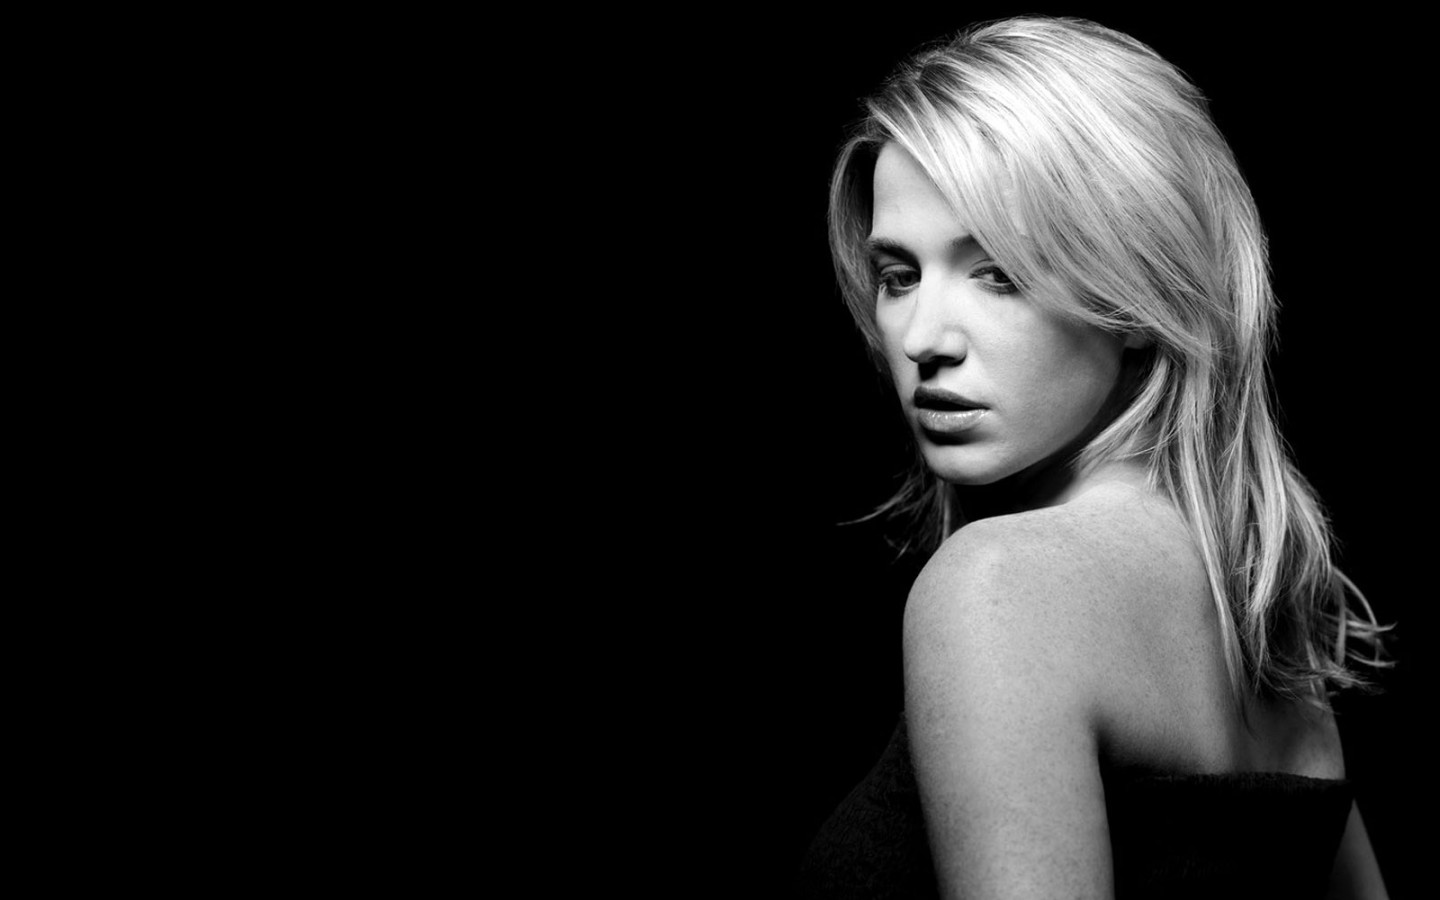  Go back to Hot Celebrities Wallpapers for Windows 81 Next Image 1440x900